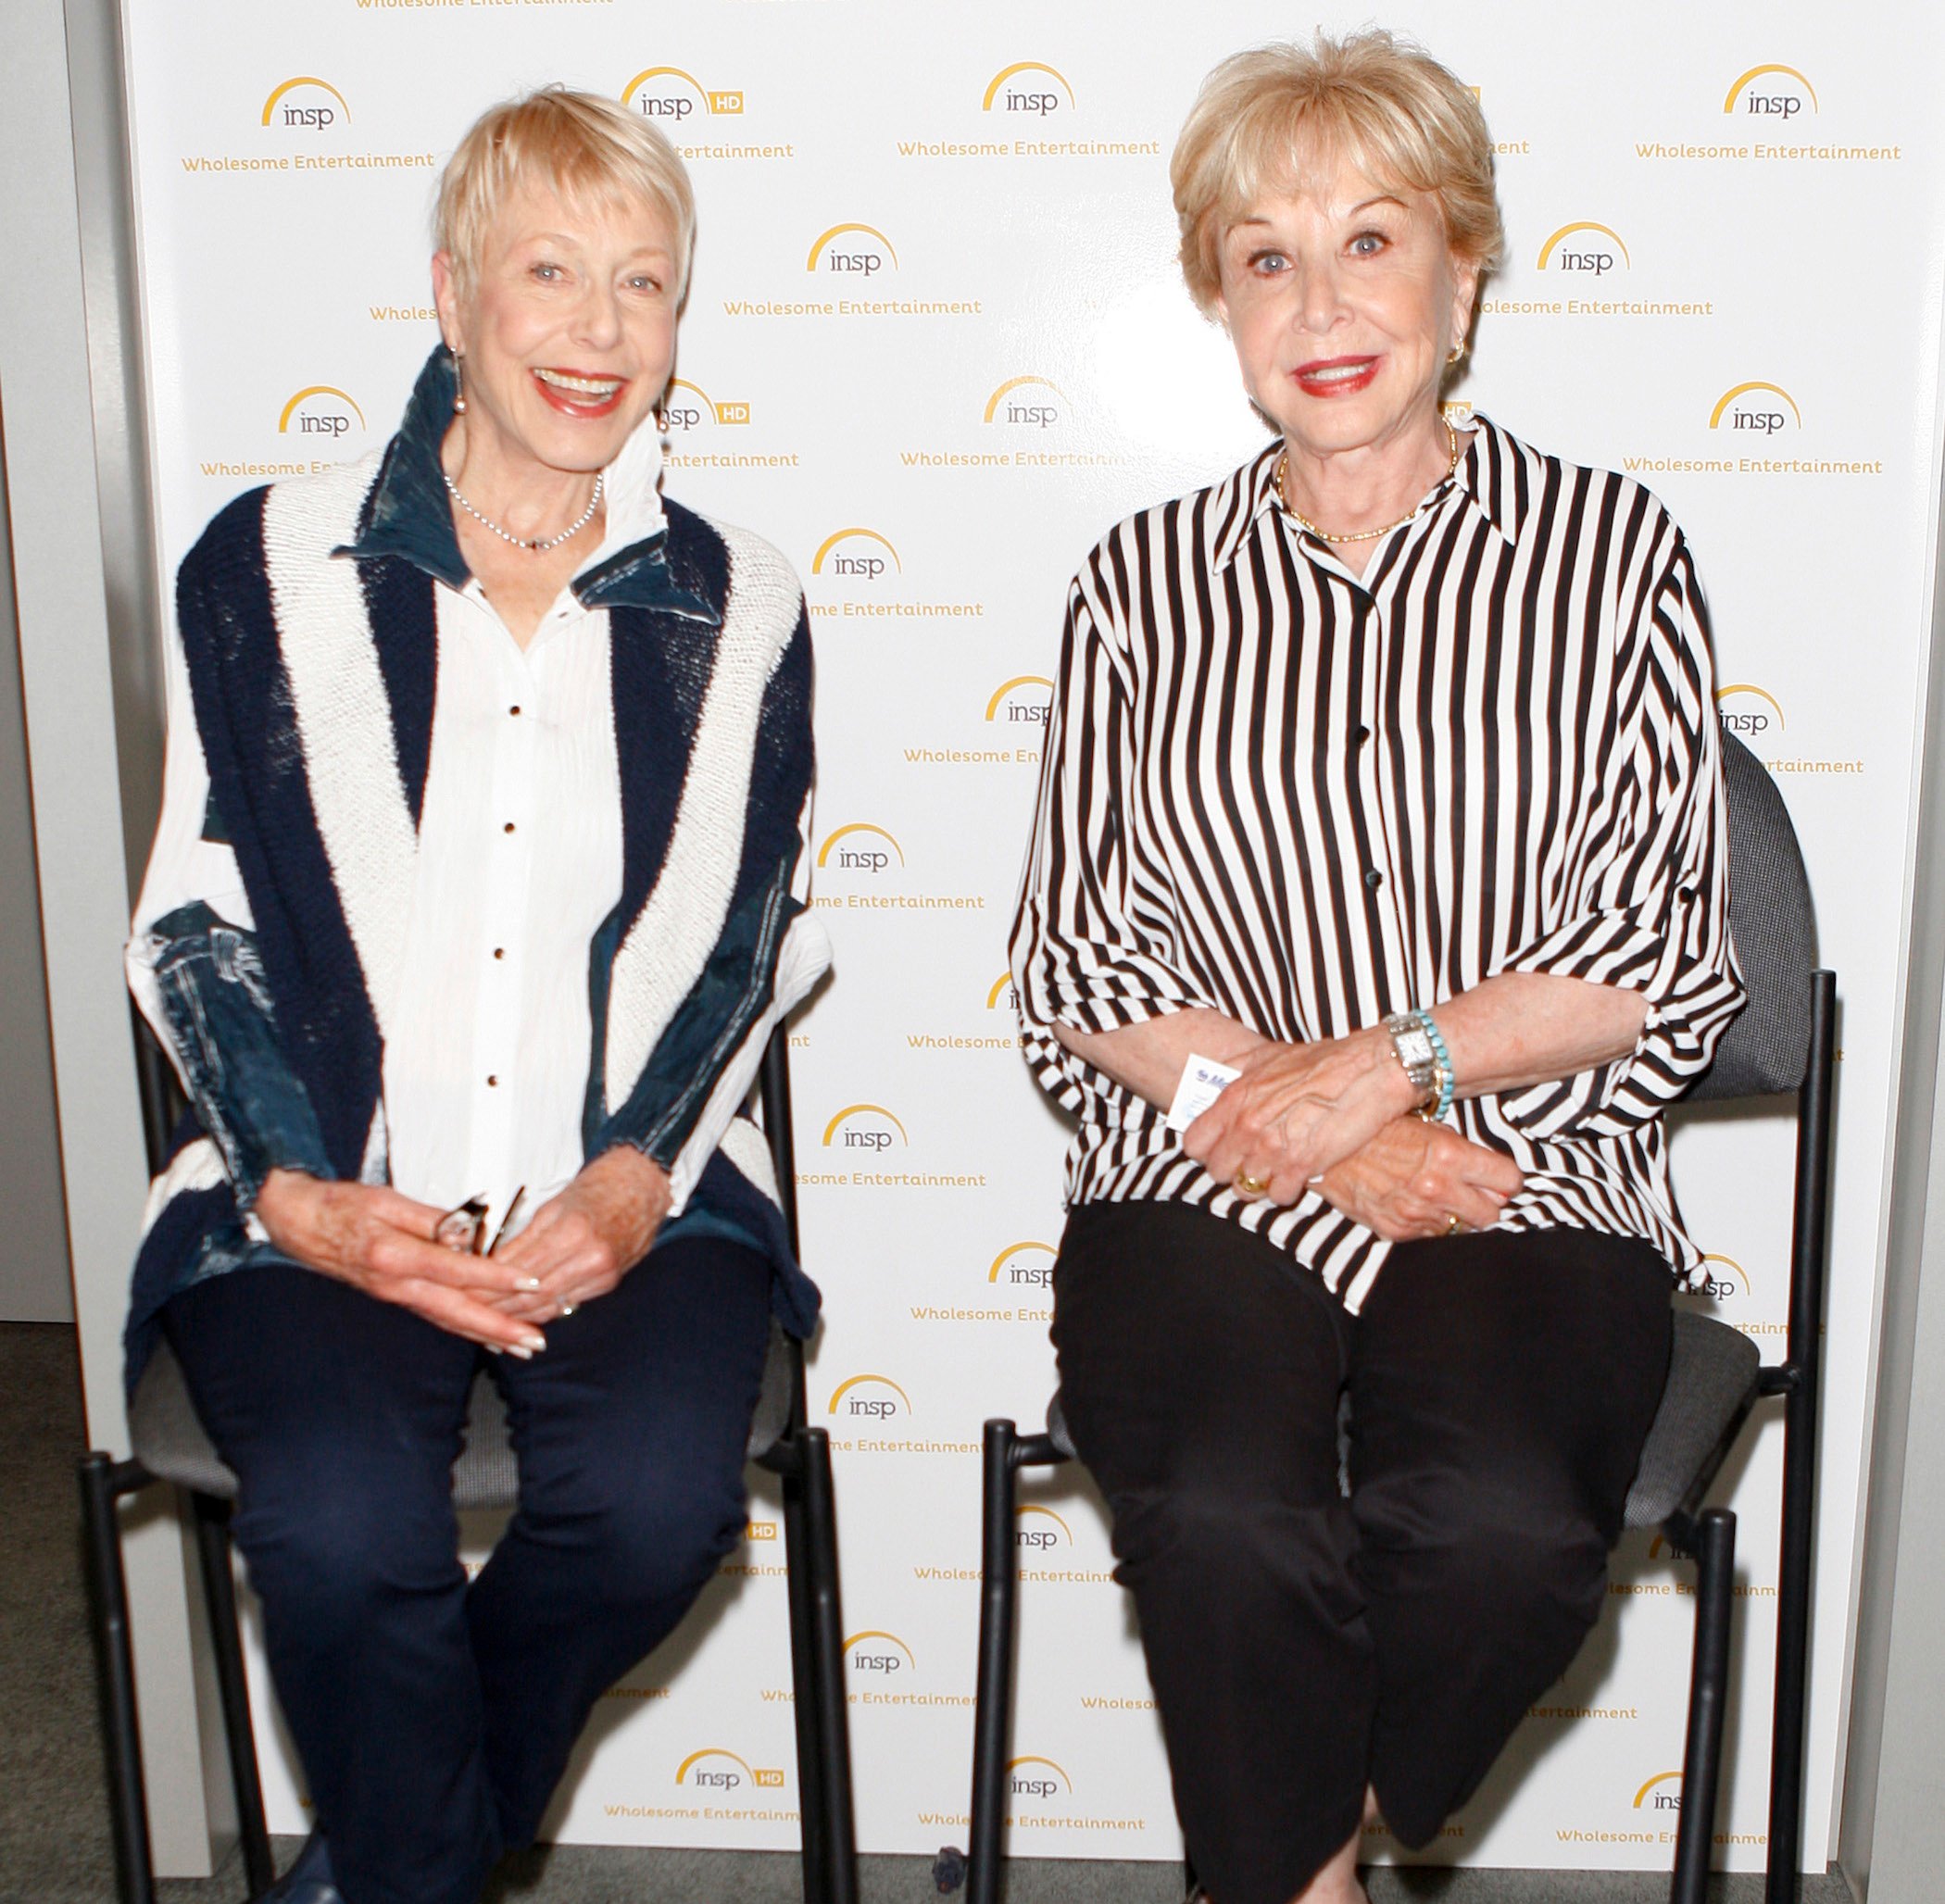 Karen Grassle and Michael Learned at The Cable Show on April 30, 2014 